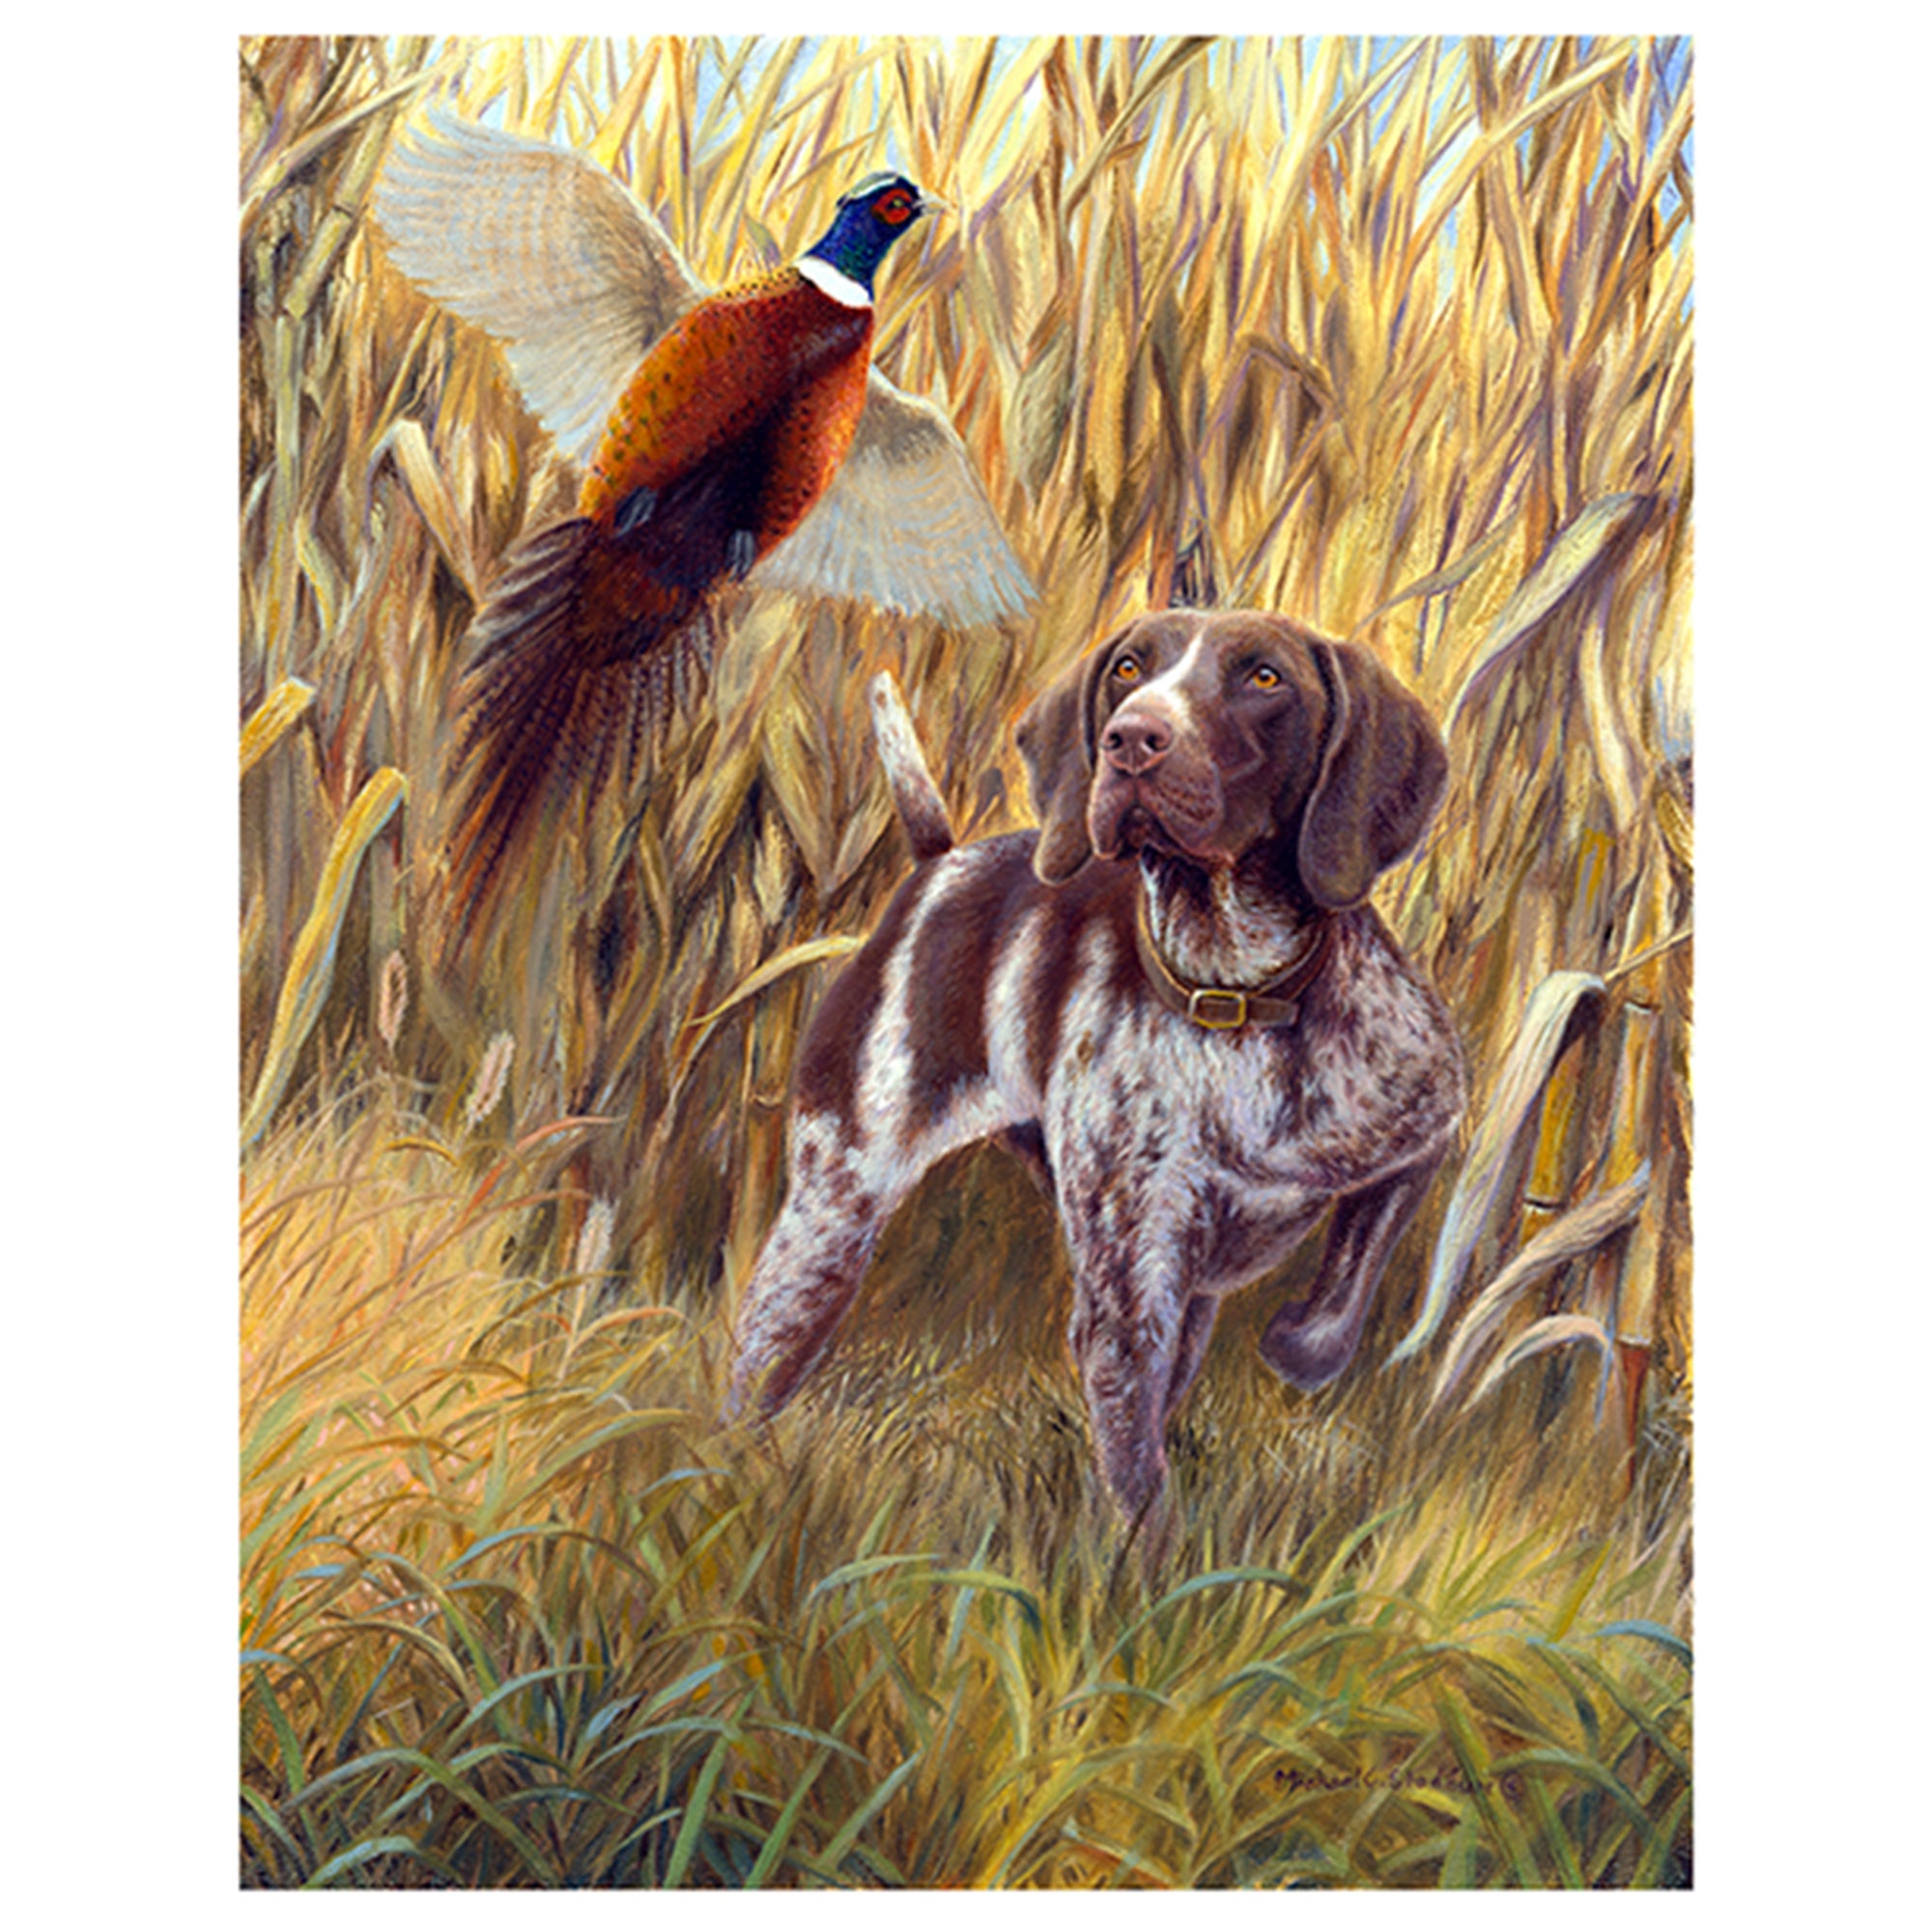 "Steady to Wing" A Limited Edition German Shorthaired Pointer Print